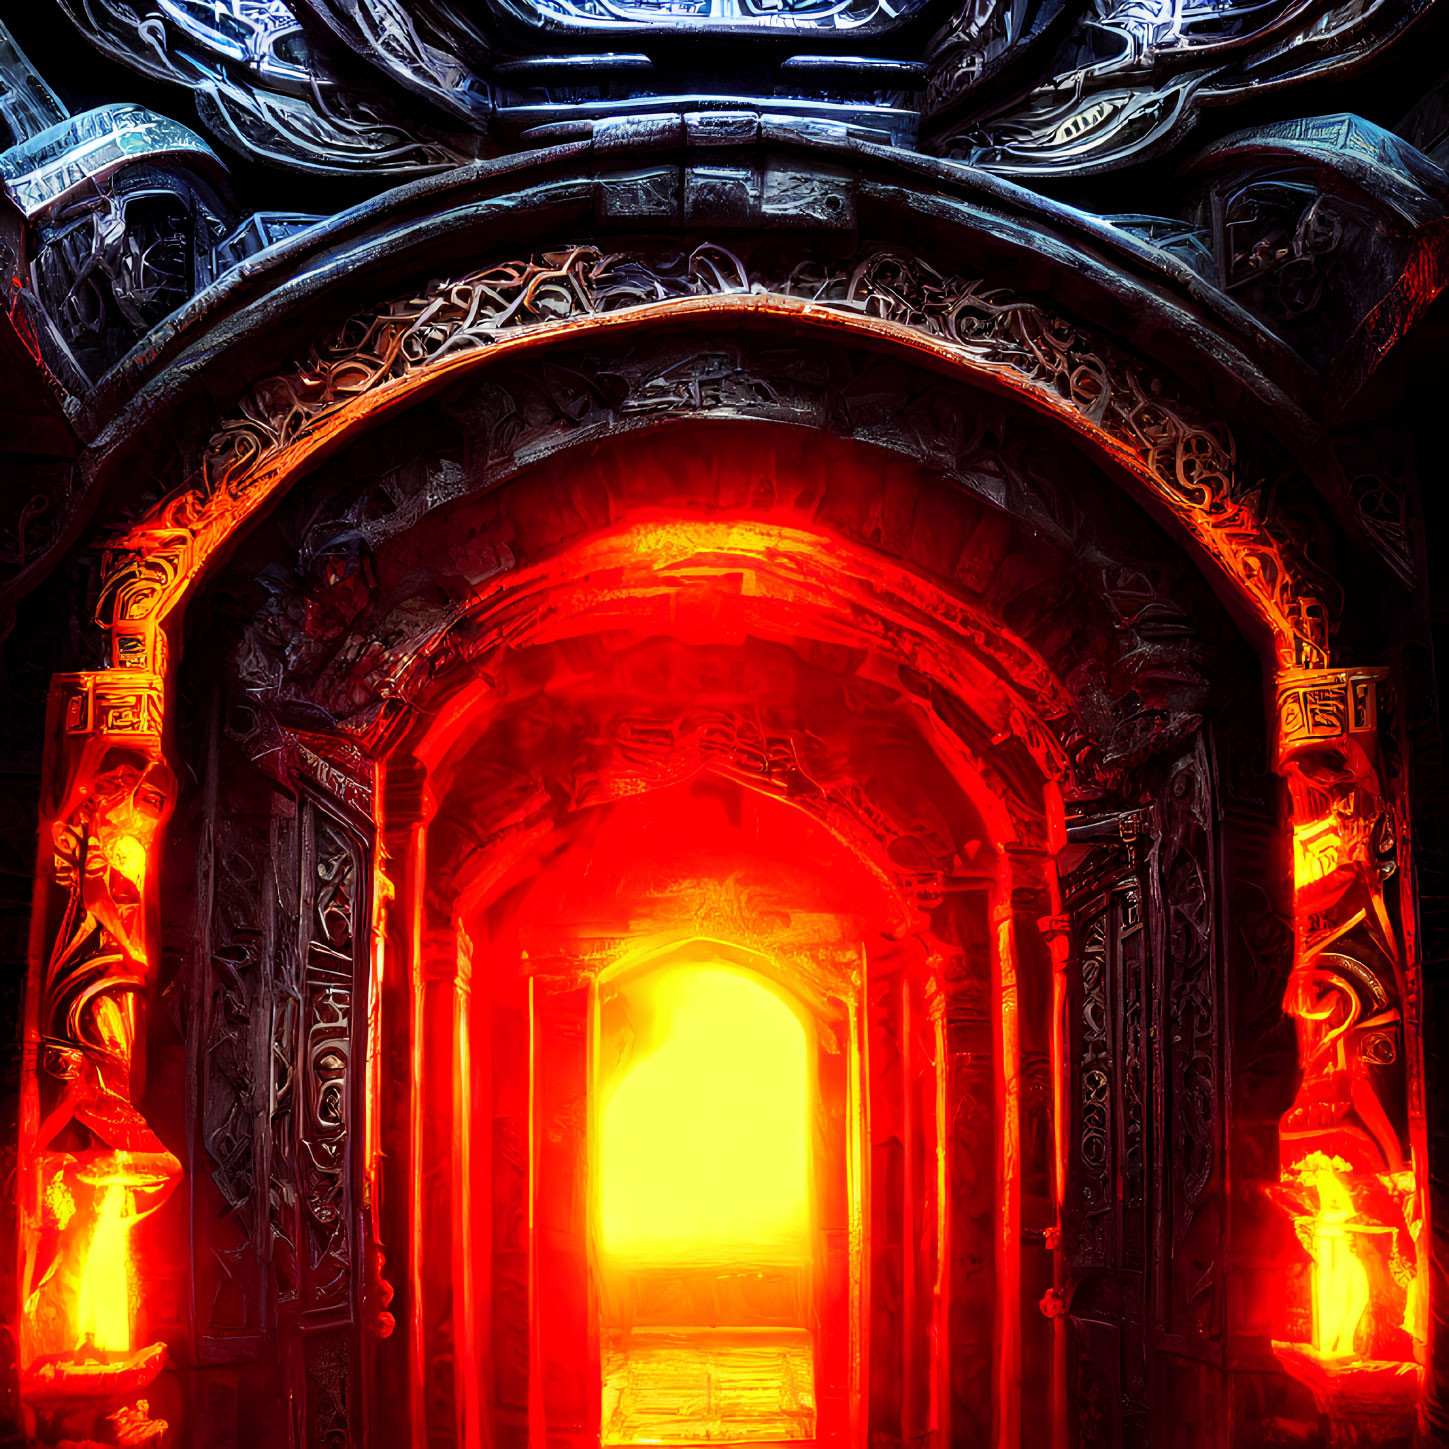 Stone archway with fiery red glow beyond passage